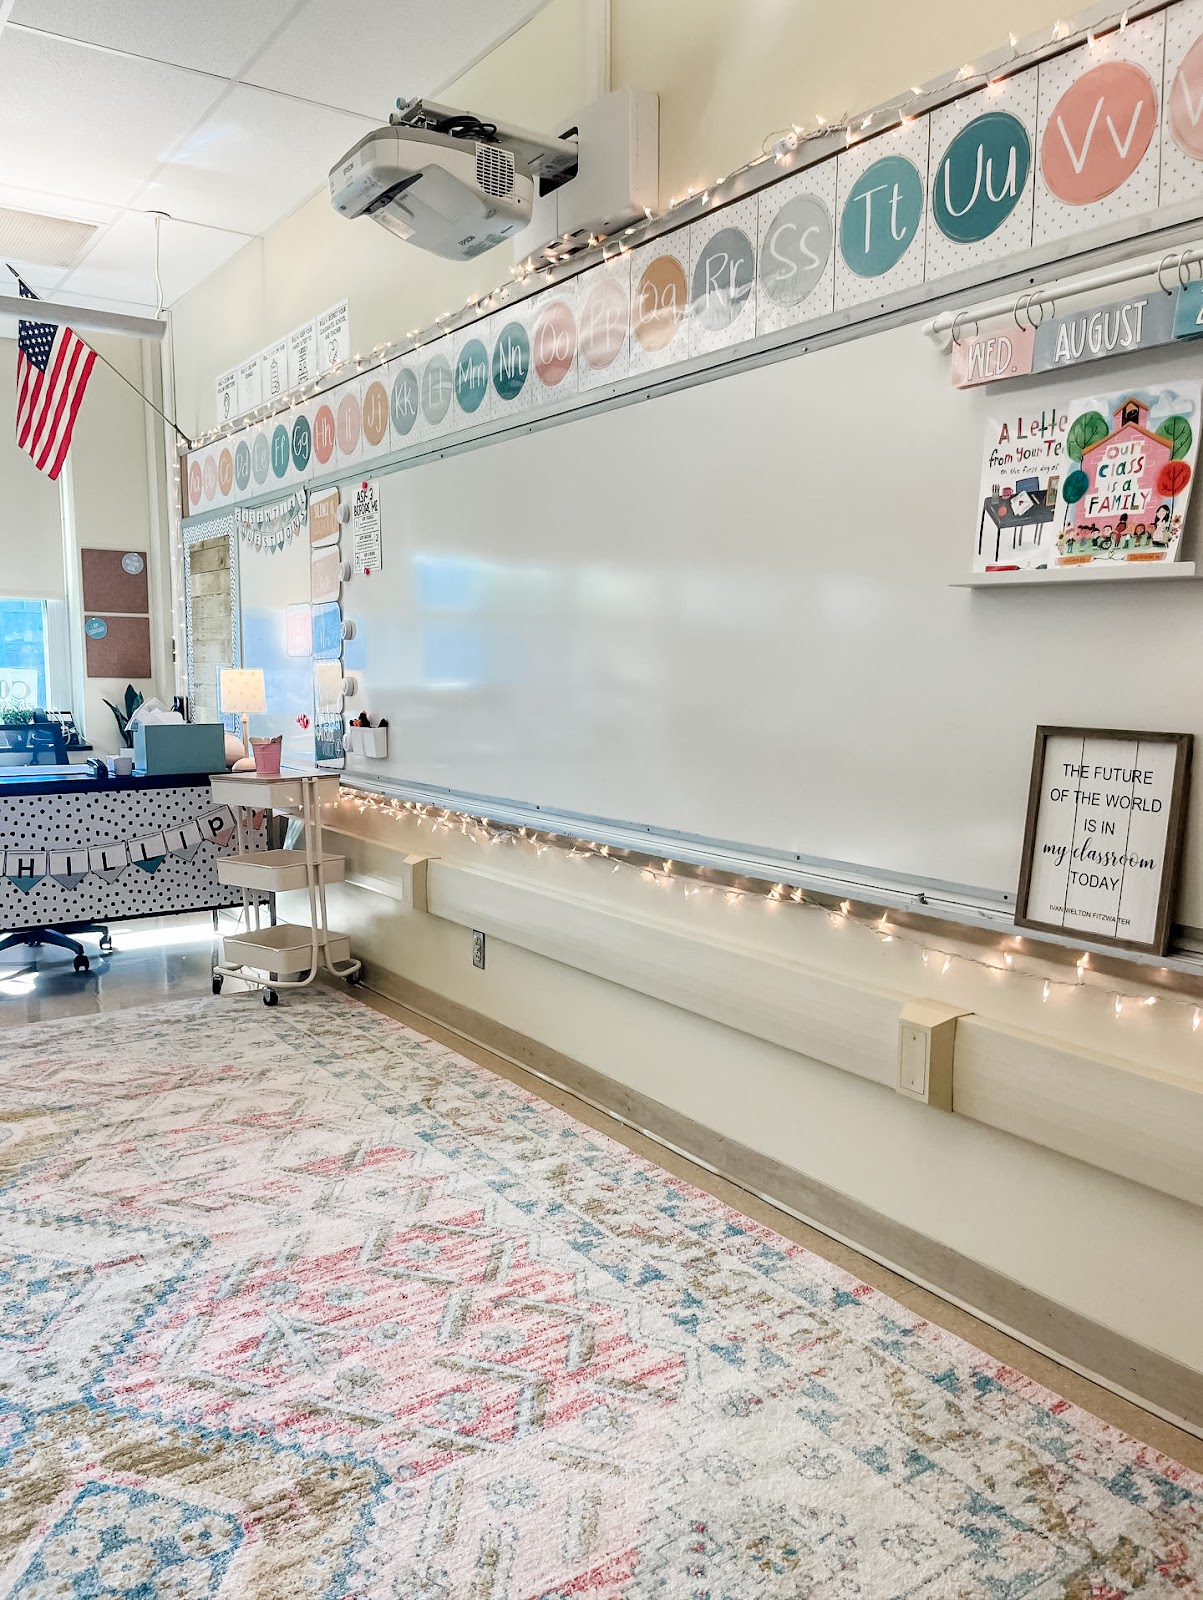 This image shows a cozy classroom with a rug, twinkle lights, and calm-colored classroom decor. 